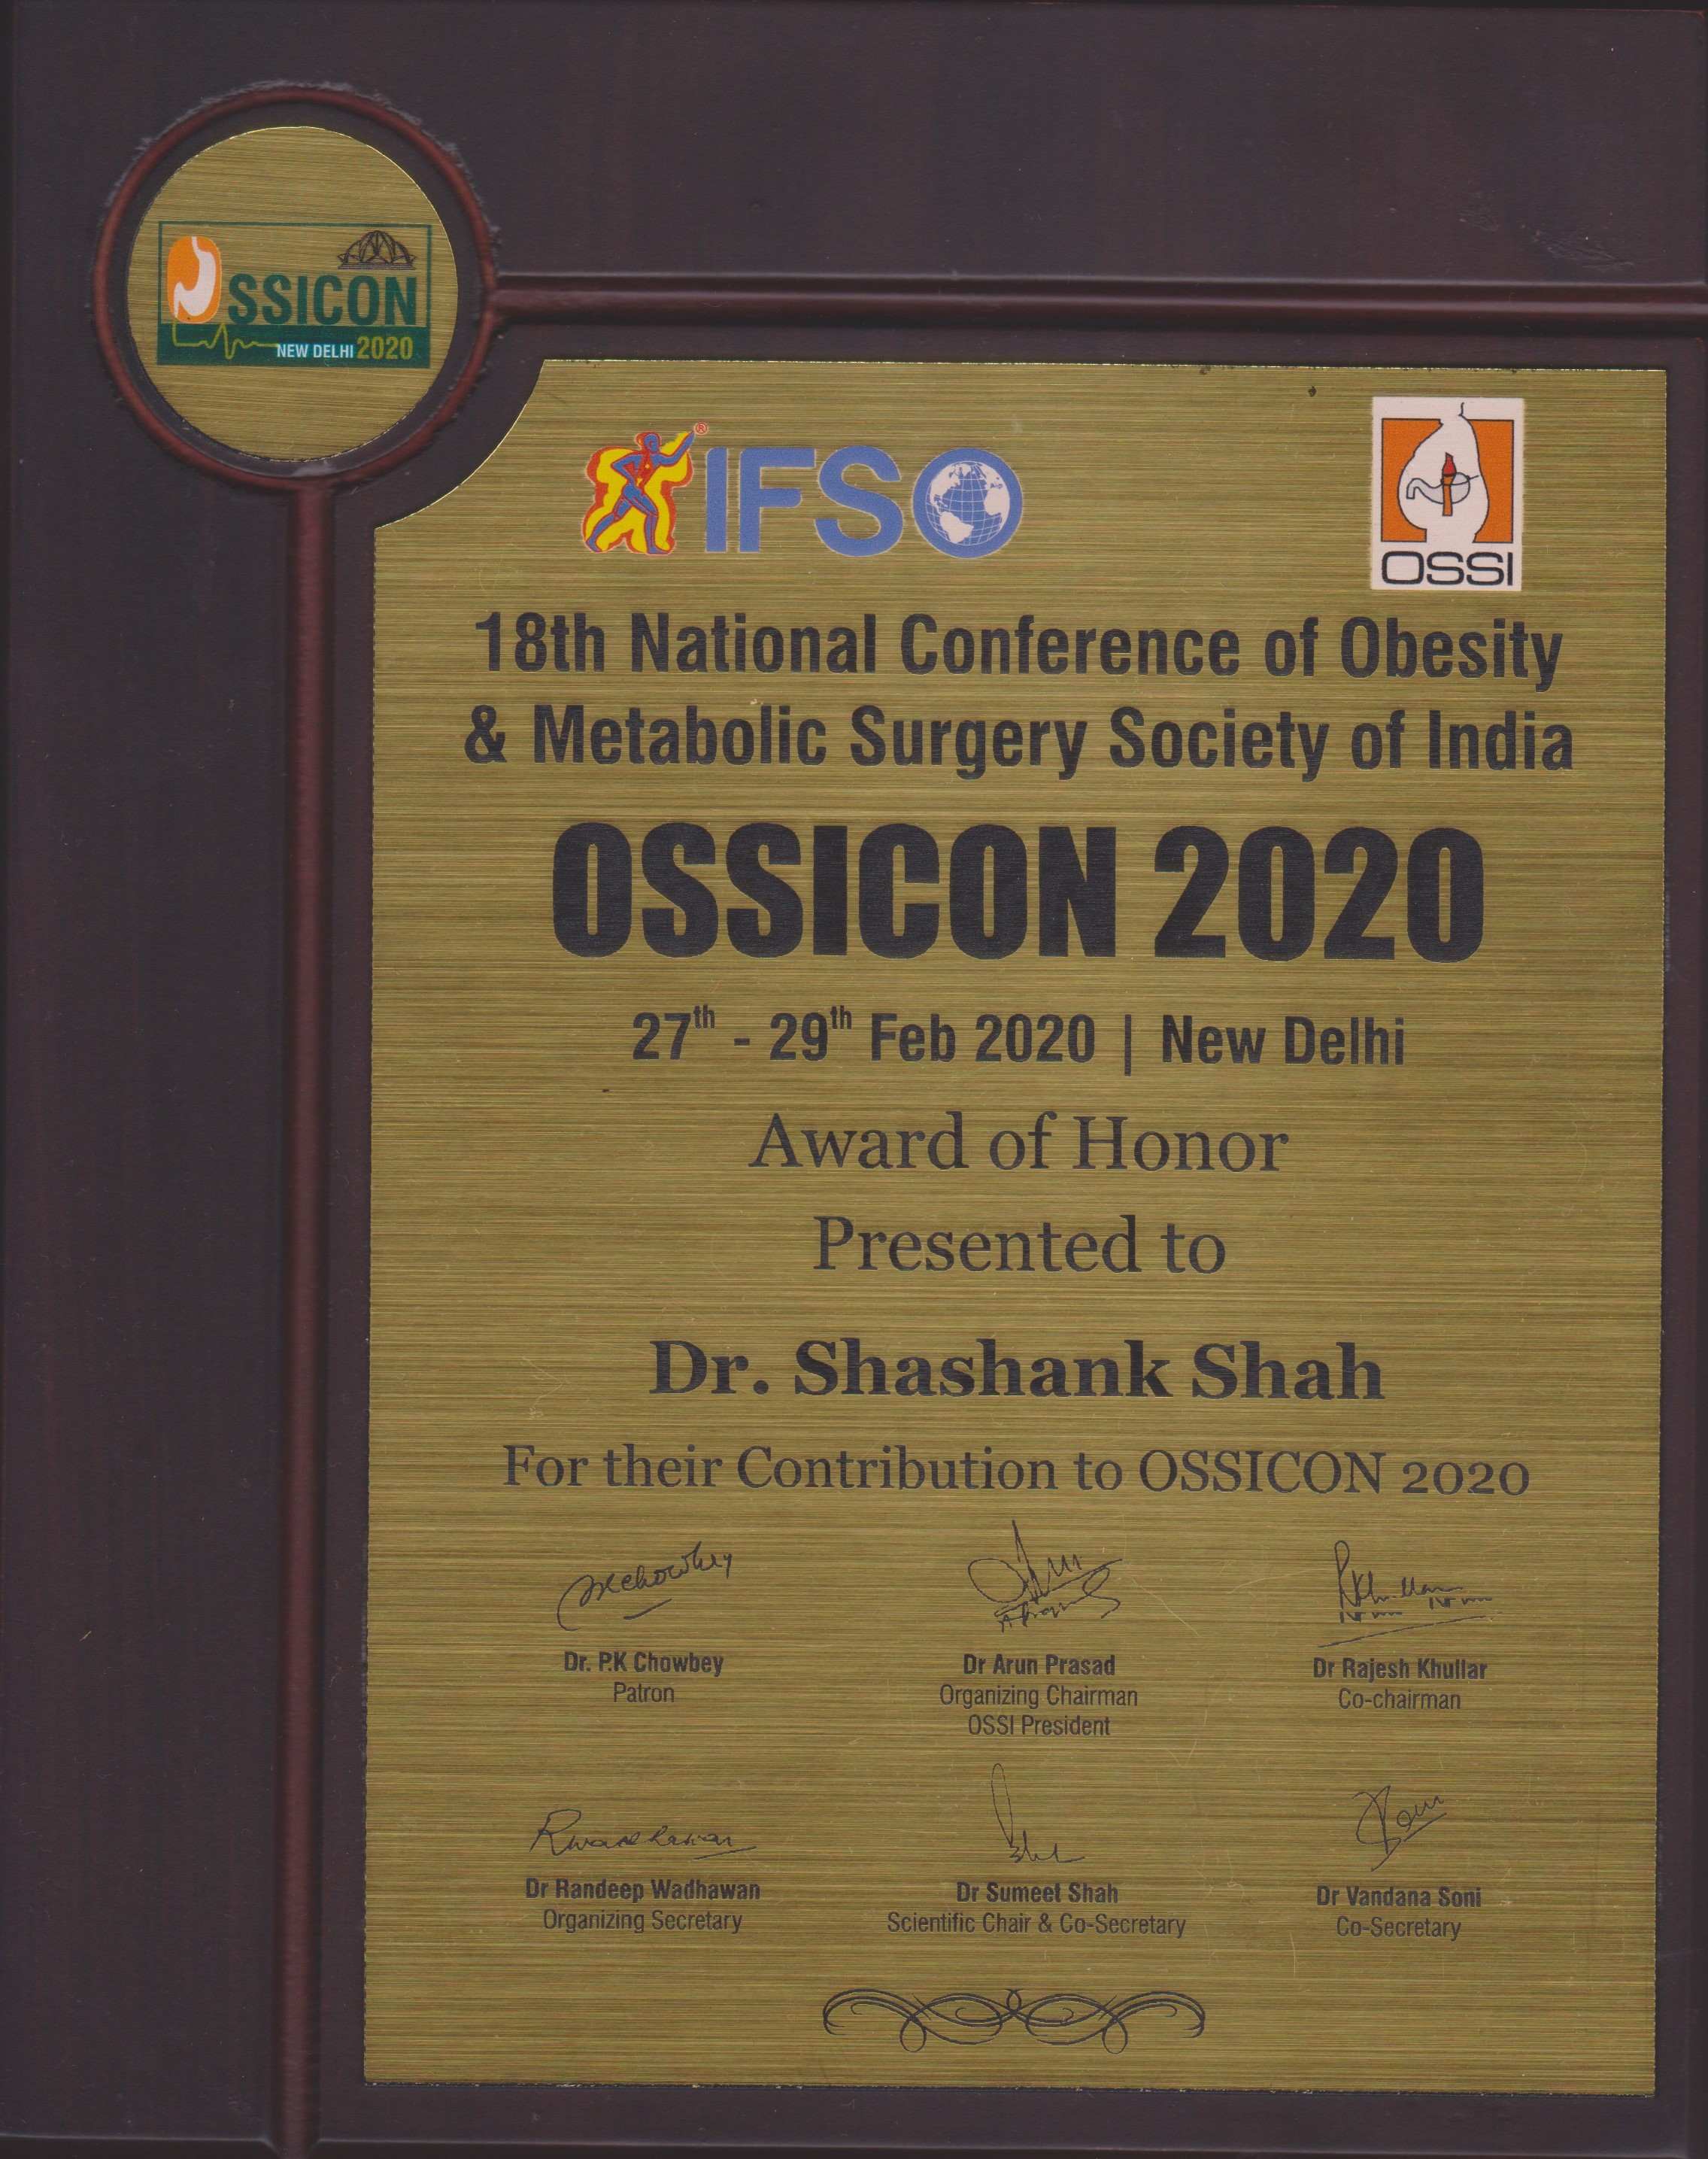 DR Shashank Shah was given the Award of Honour at the 18th National Conference Obesity and Metabolic Surgery Society of India OSSICON 2020 for his contribution. 